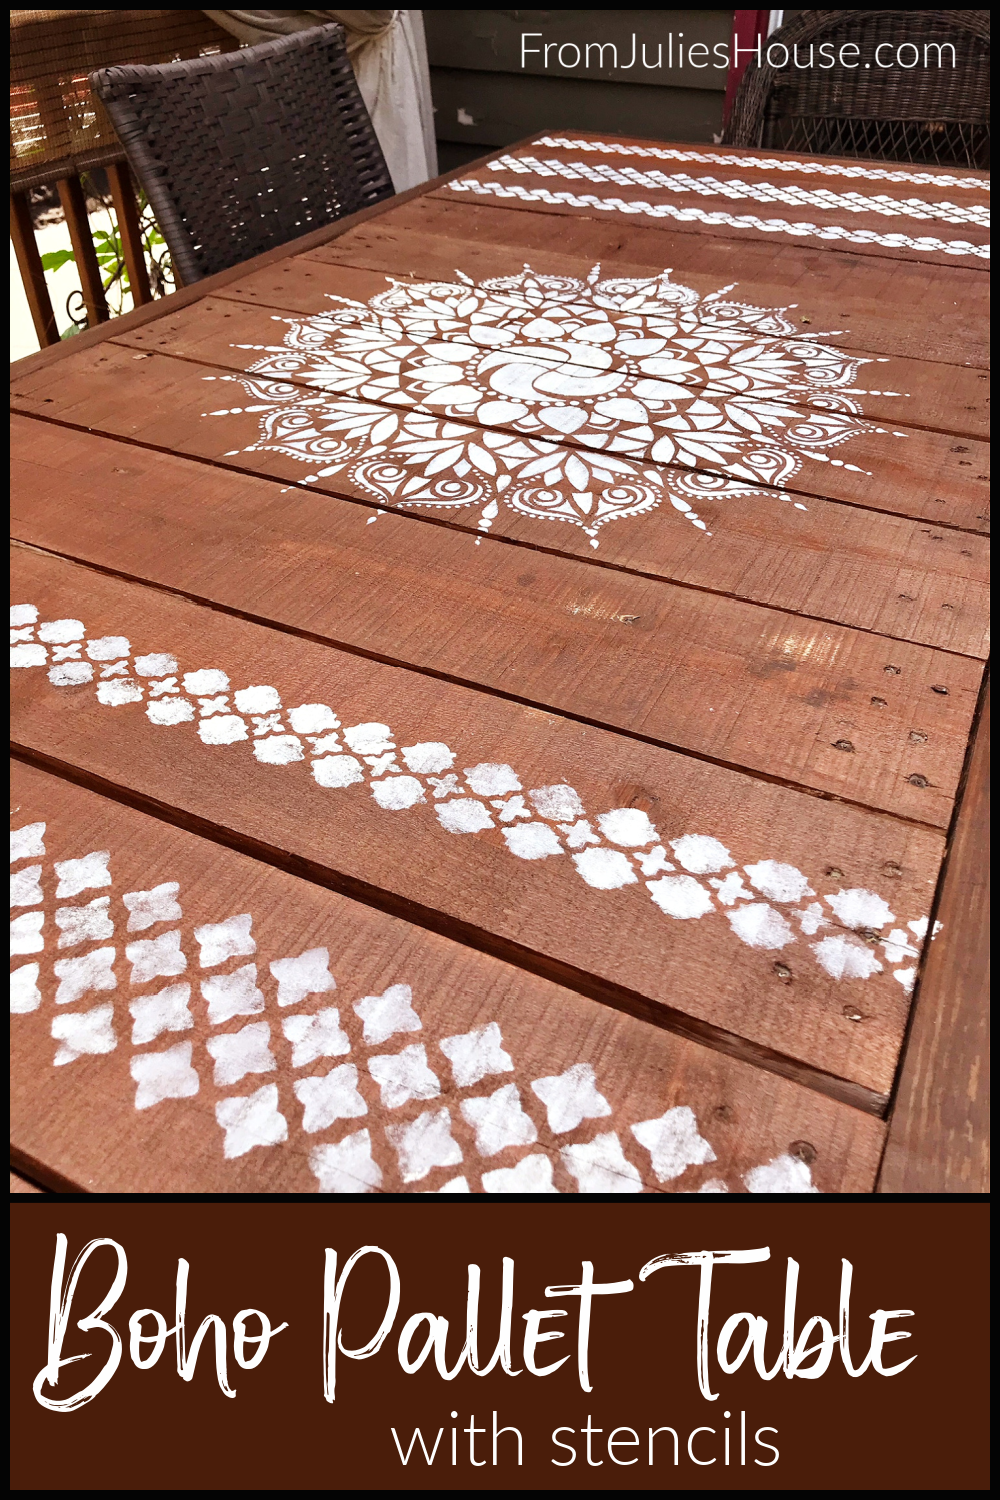 Sharing a quick update I did on the pallet table on our deck - I added a mandala and Moroccan border designs with stencils.